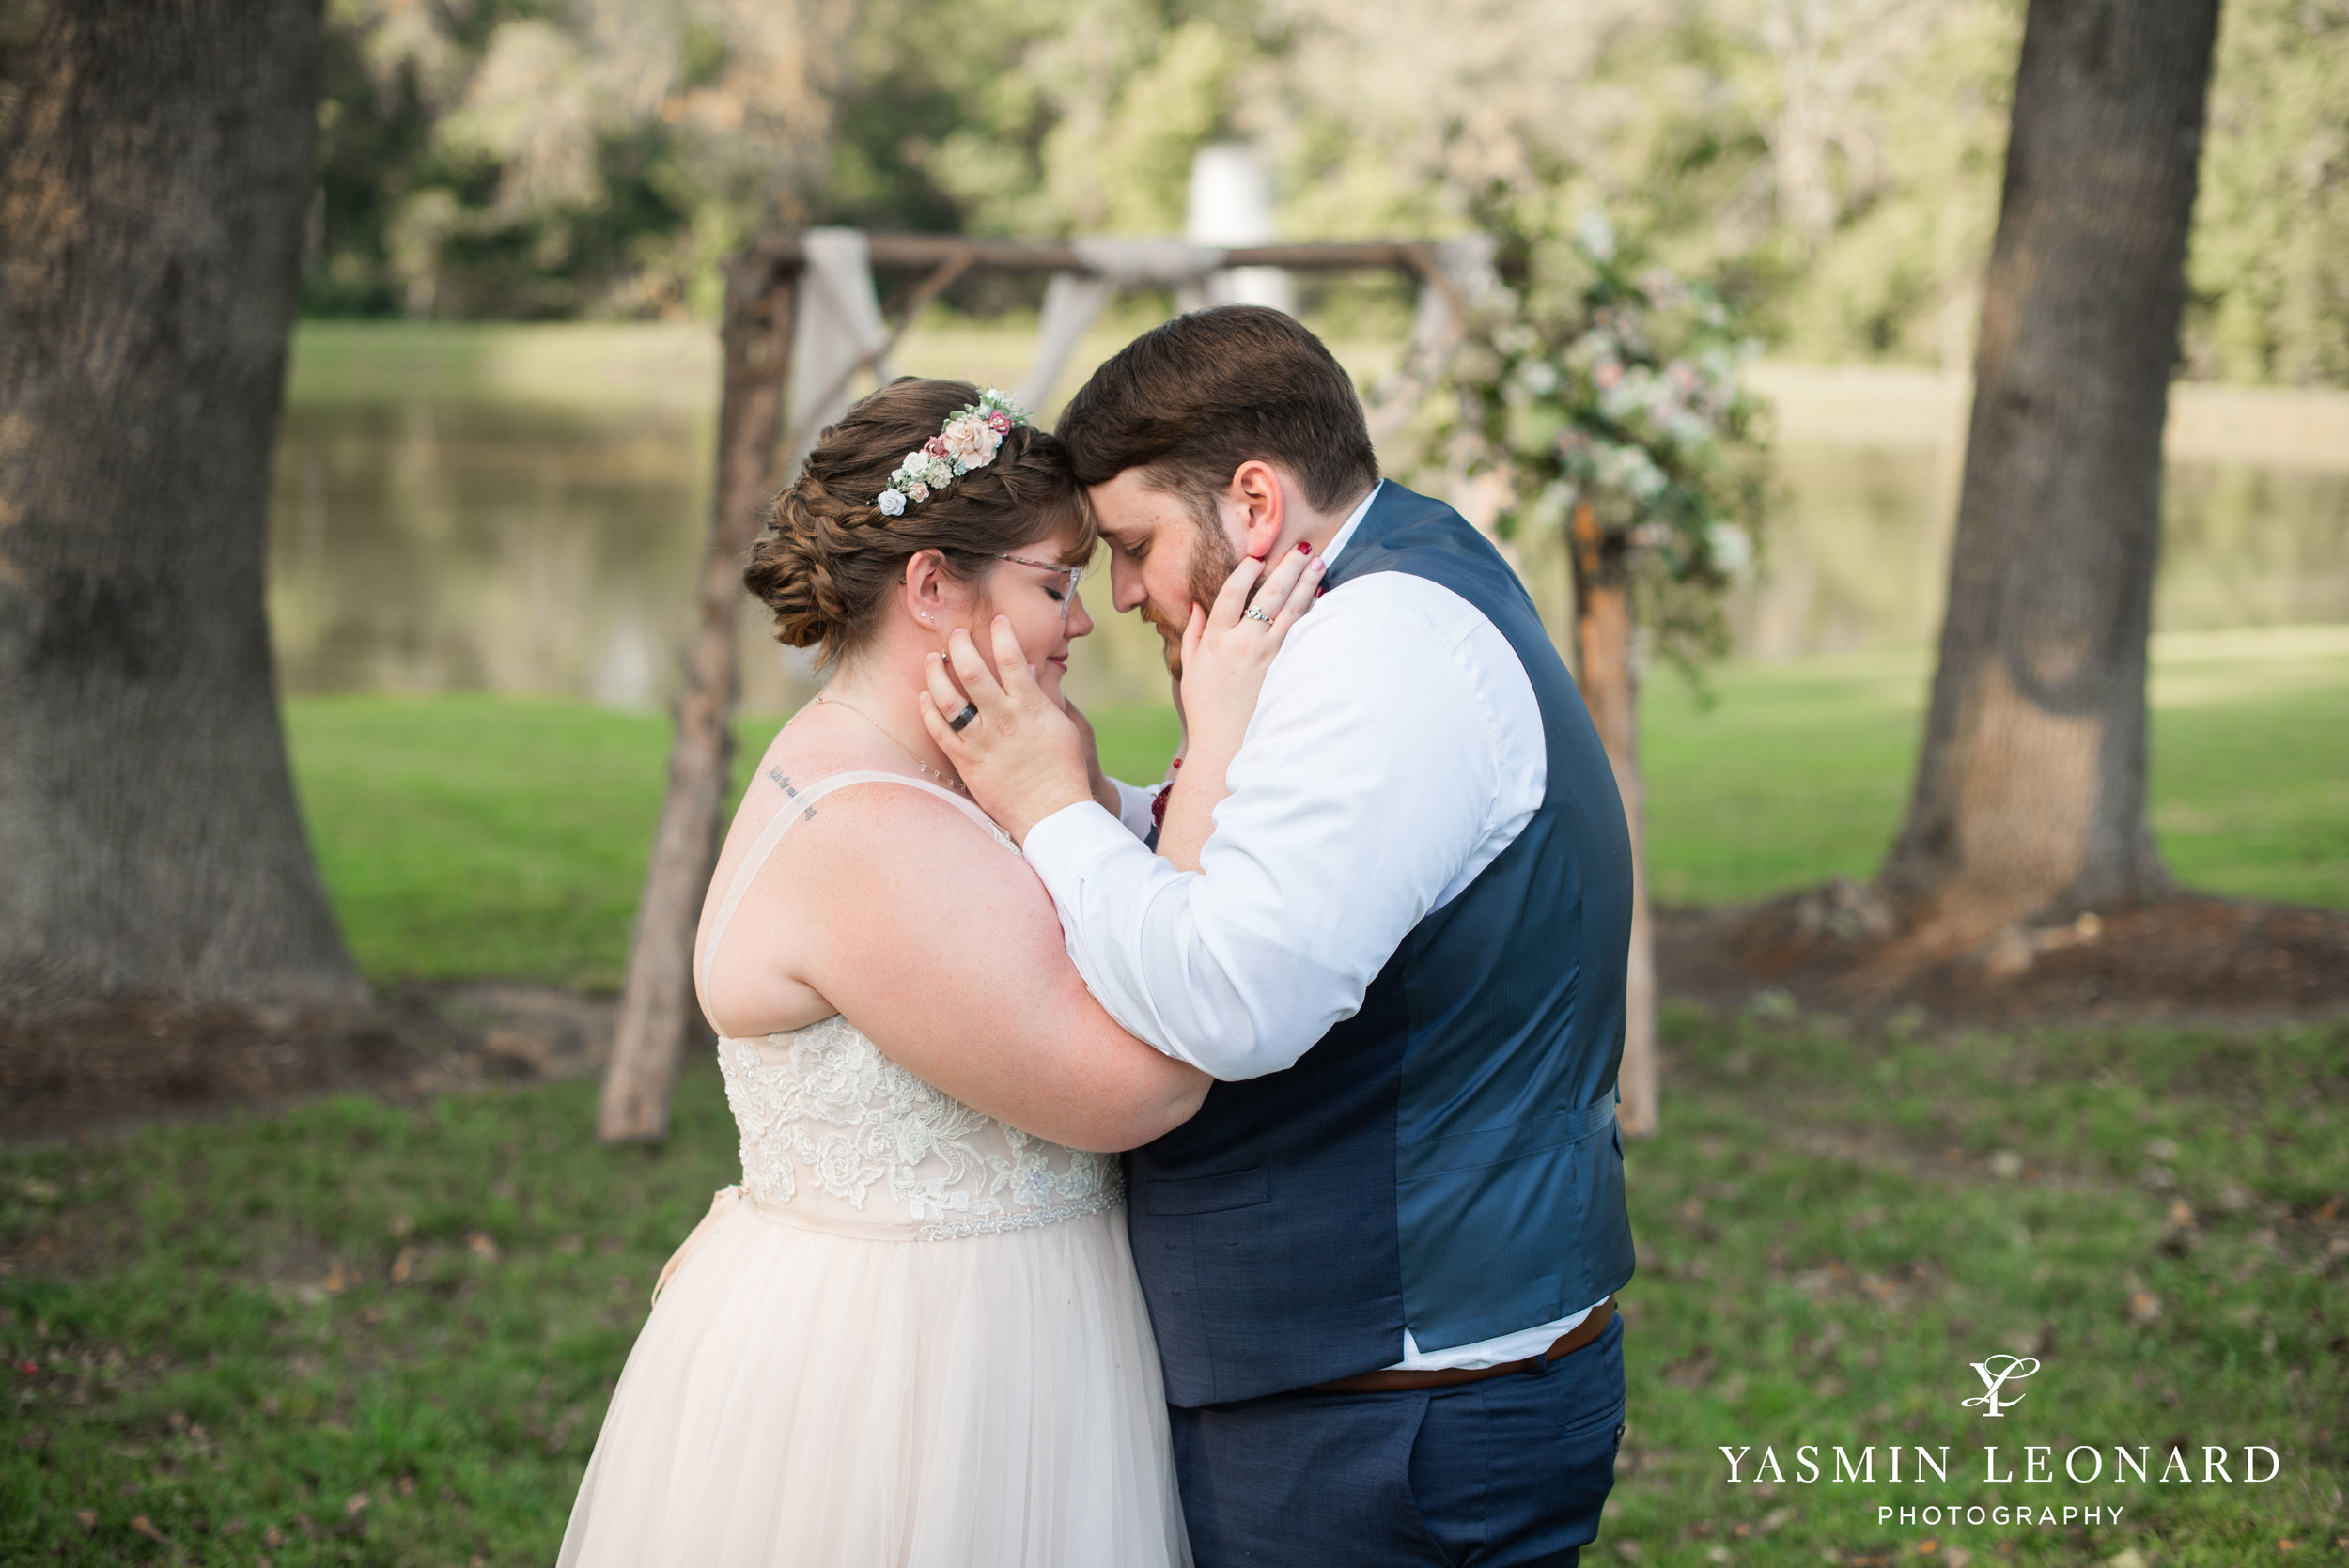 Hannah and David - l'abri at Linwood - NC Barn Weddings - Guys and Girls on Bride's Side - How to incorporate guys with bridesmaids - navy fall wedding - high point photographer - nc wedding venues - triad weddings-33.jpg